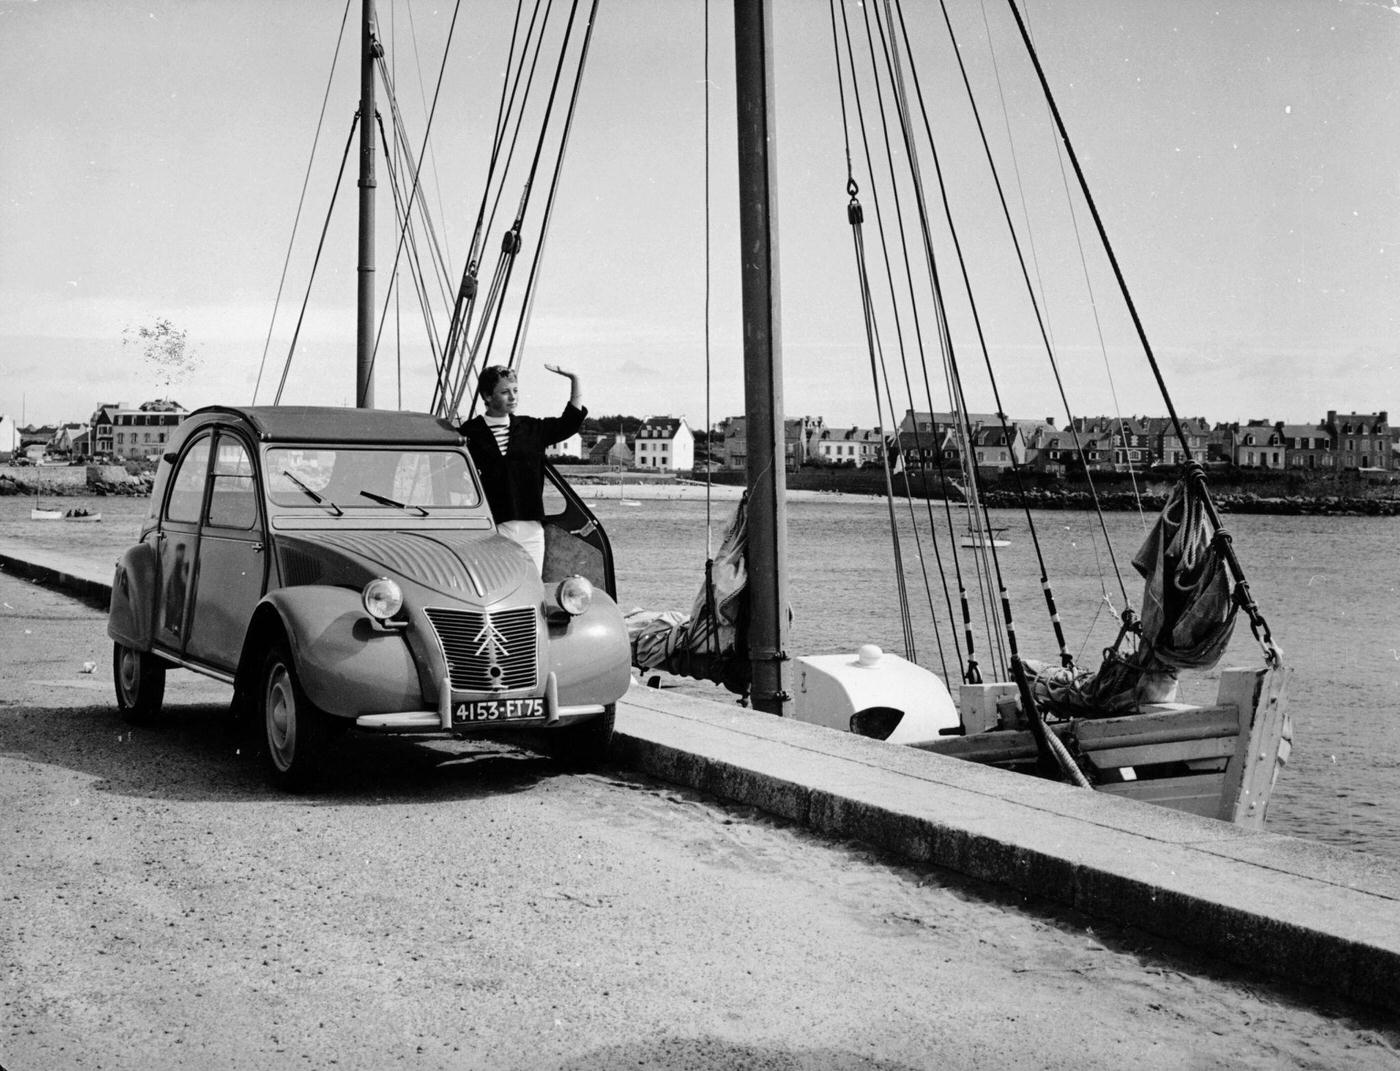 A Citroën 2CV parked on the quay at a harbor in 1957.